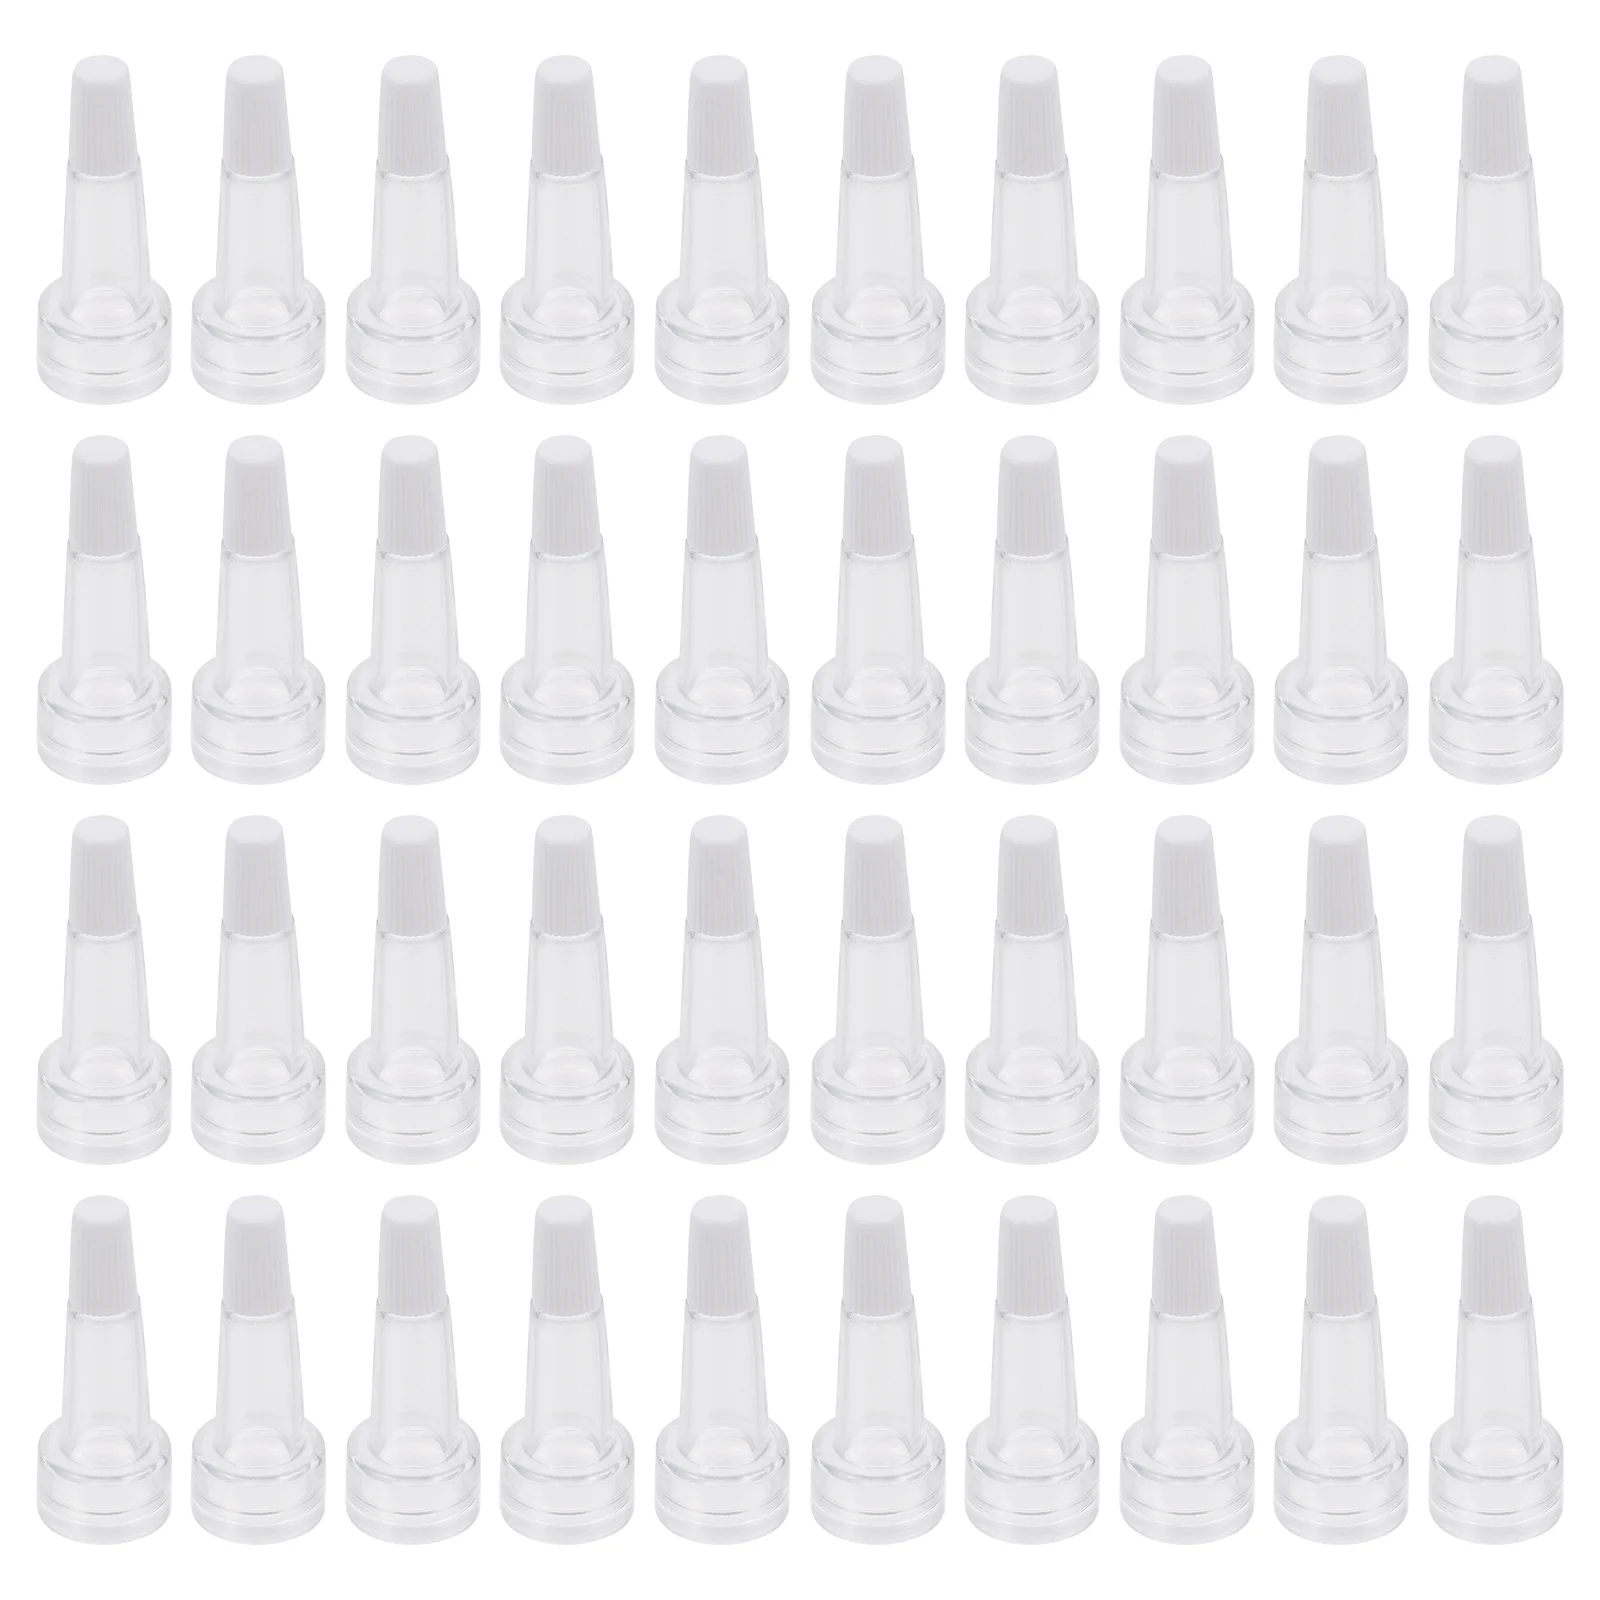 

Cap Vial Bottle Essence Lidsample Replacement Eye Container Horn Tubeessential Vialsreagent Sealing Oils Squeezable Mini